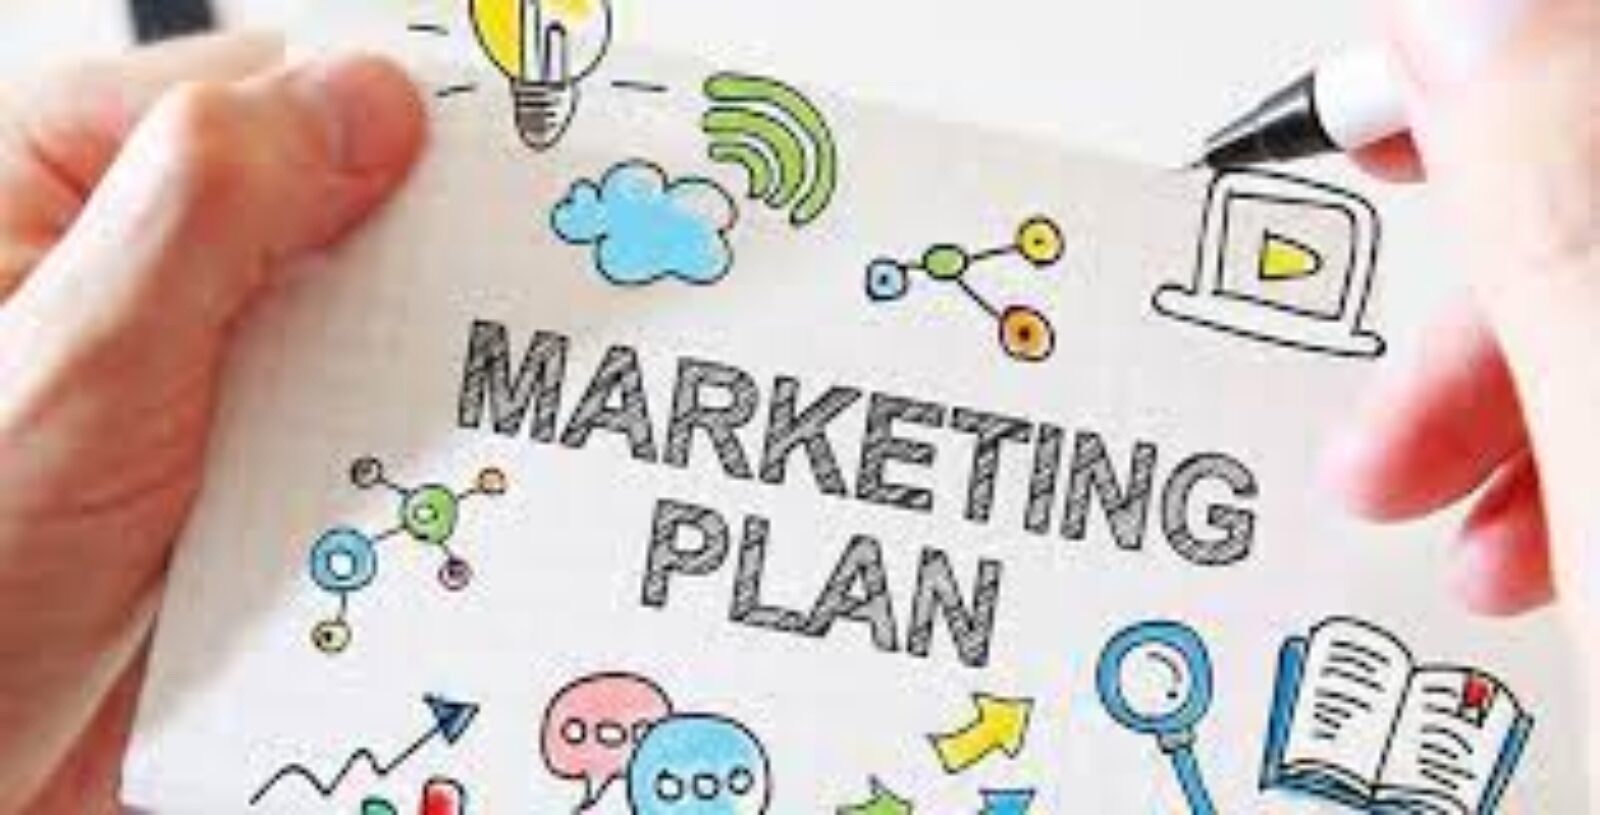 Marketing plan: How do you develop it and what are the most important steps?